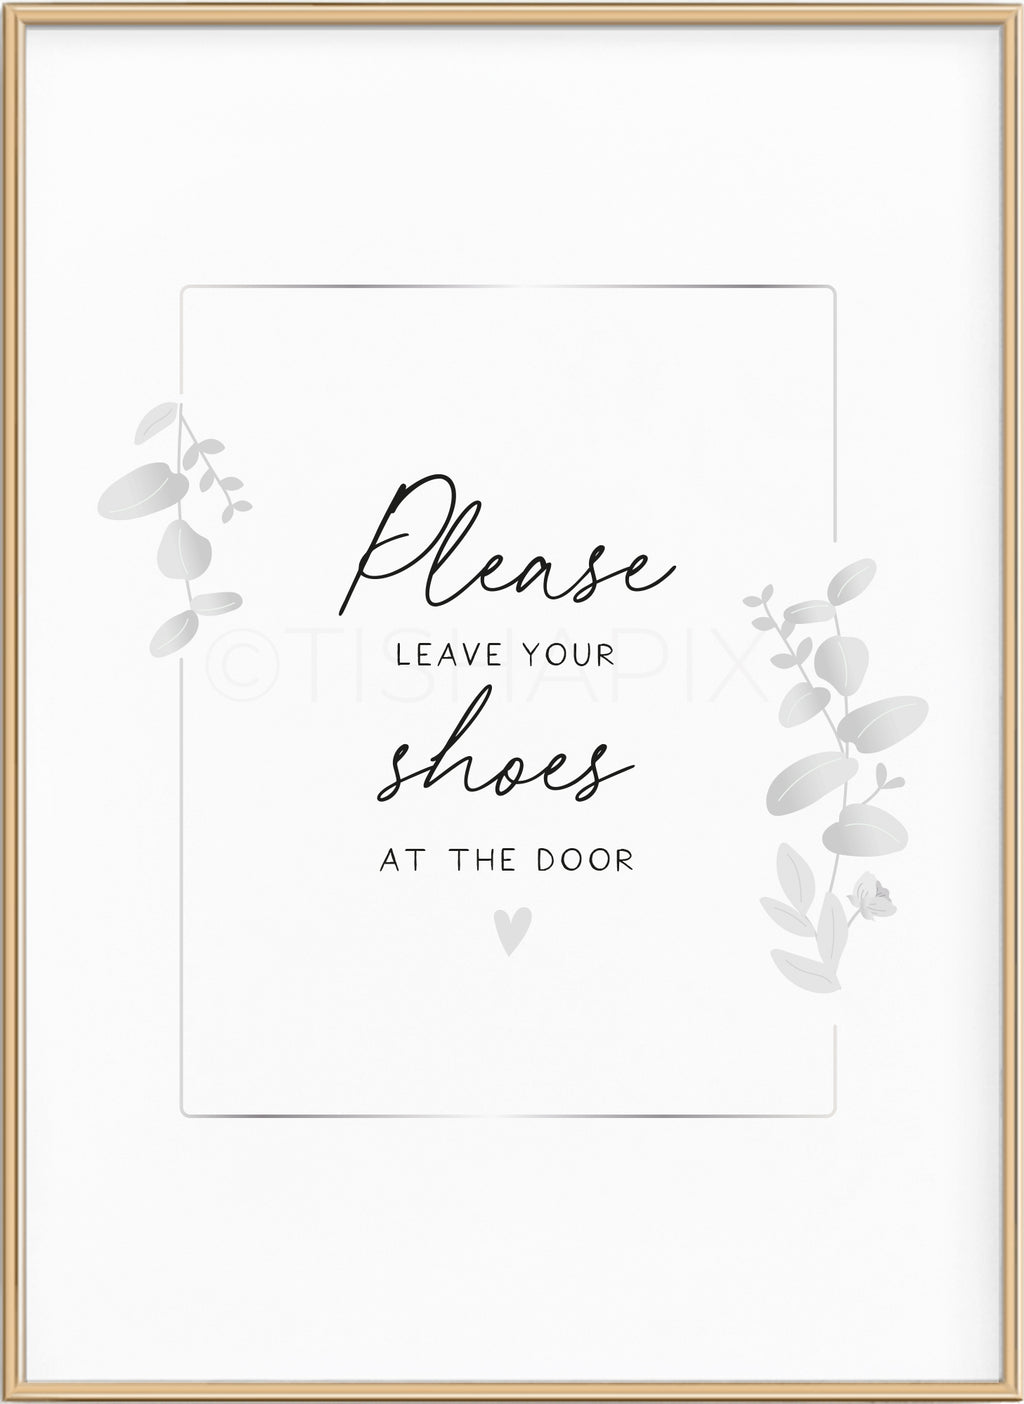 Please Leave Your Shoes At The Door Wreath